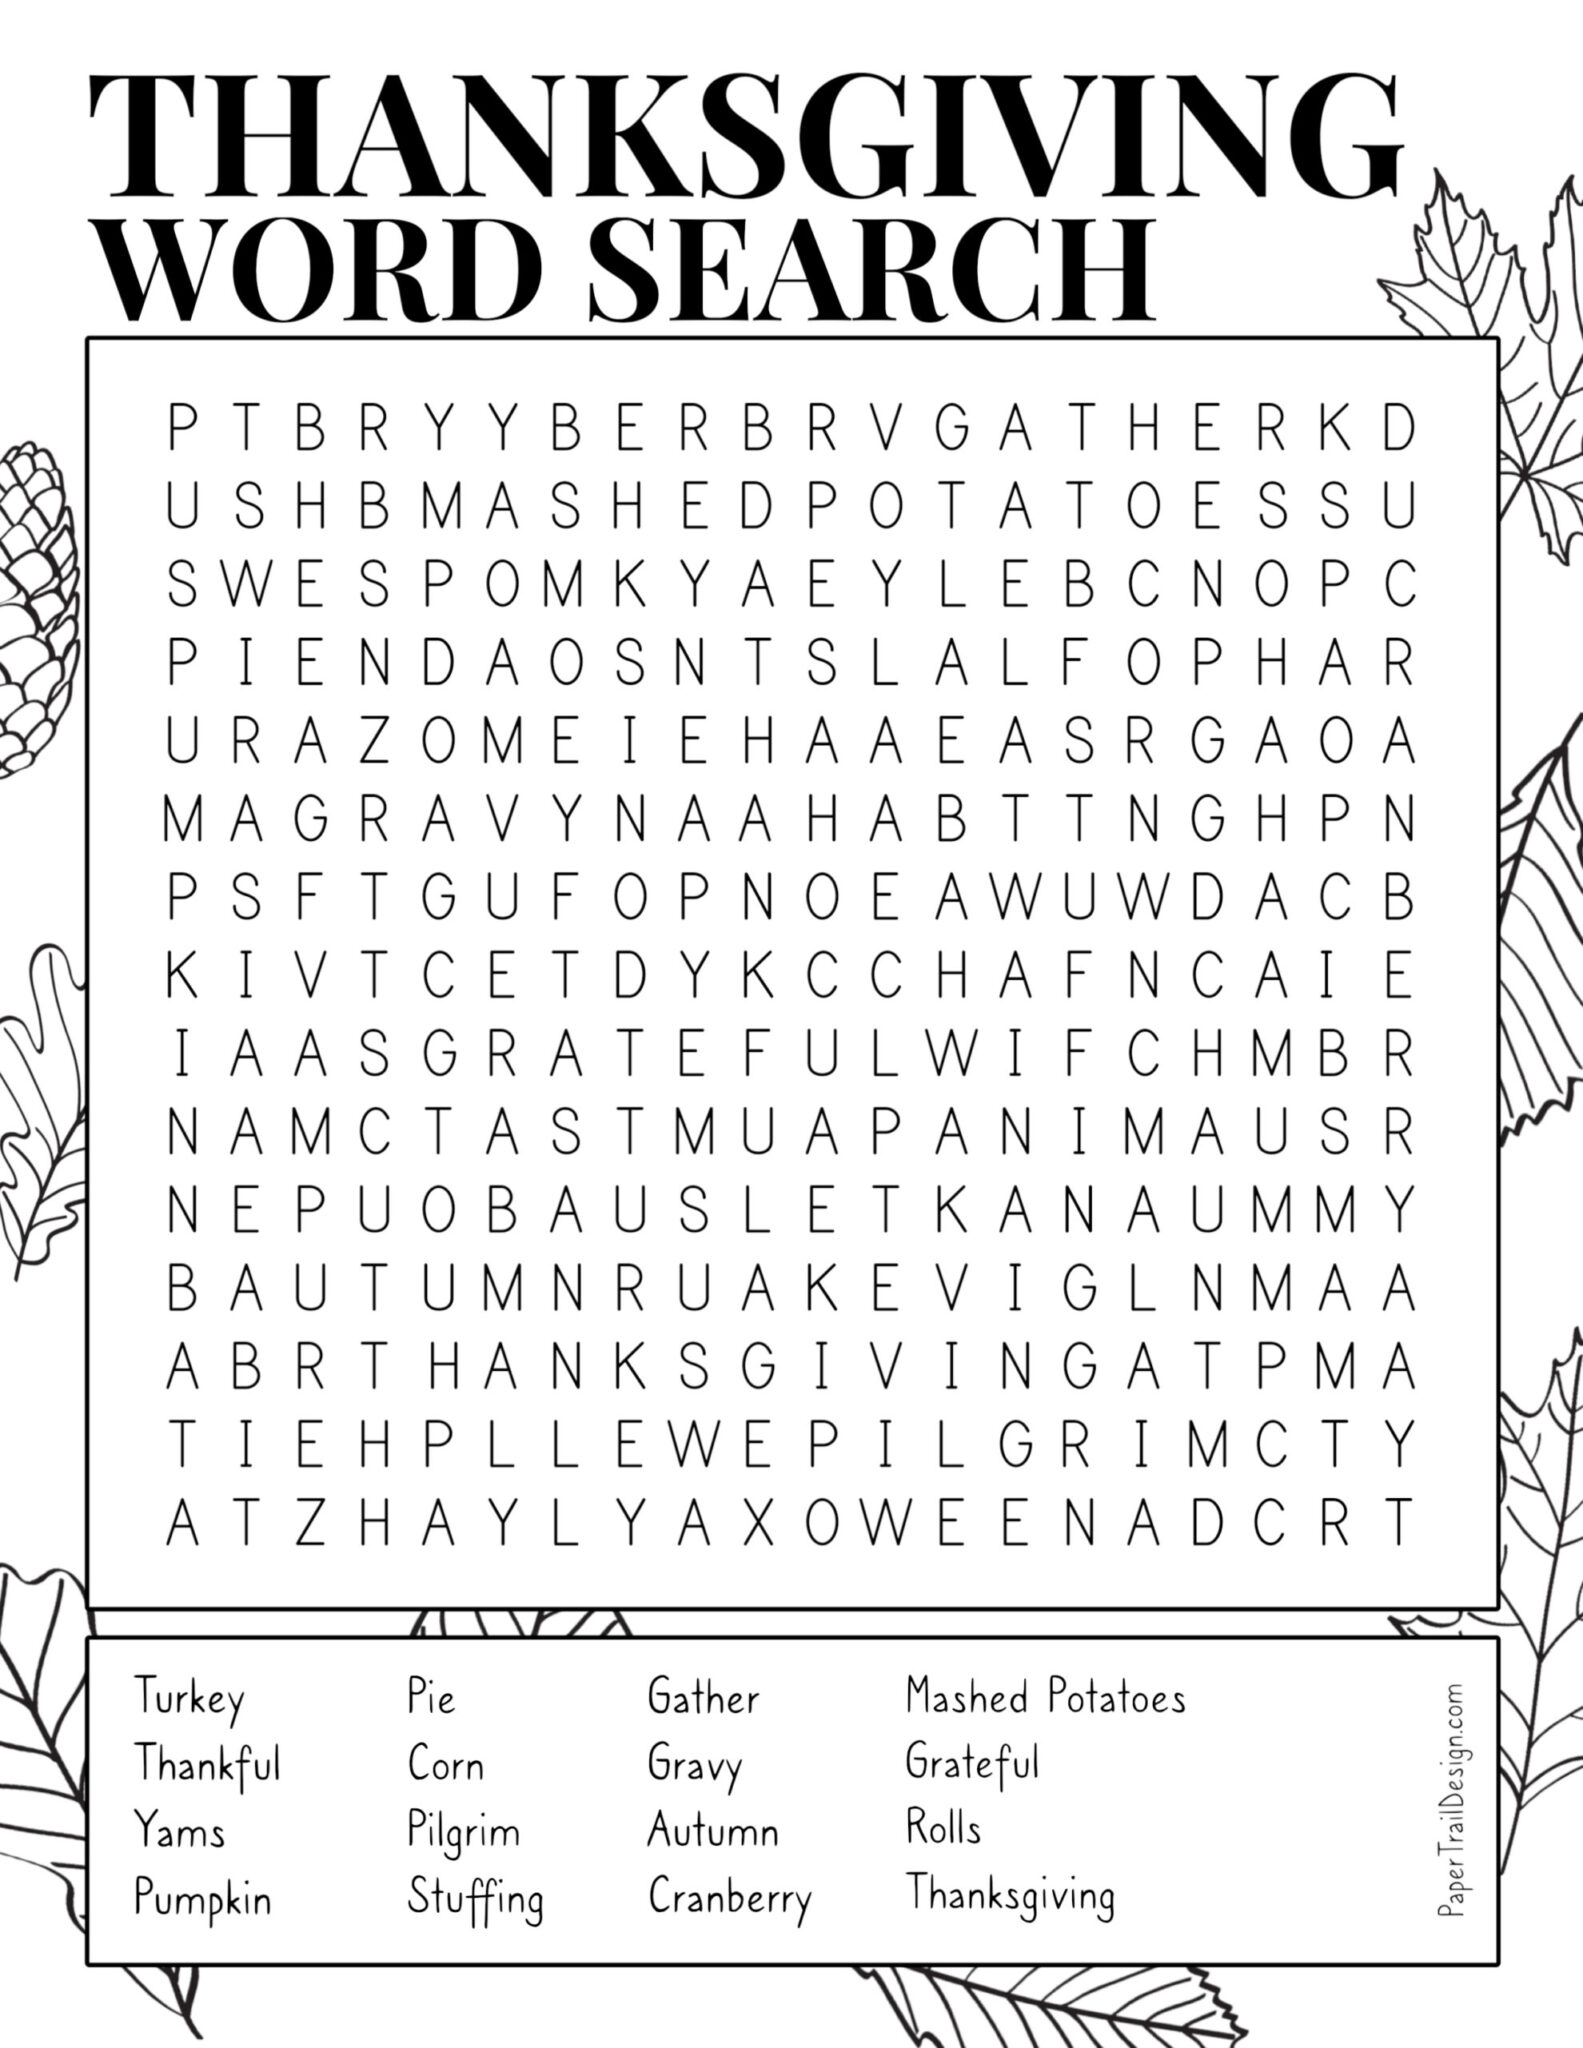 thanksgiving-word-search-printable-paper-trail-design